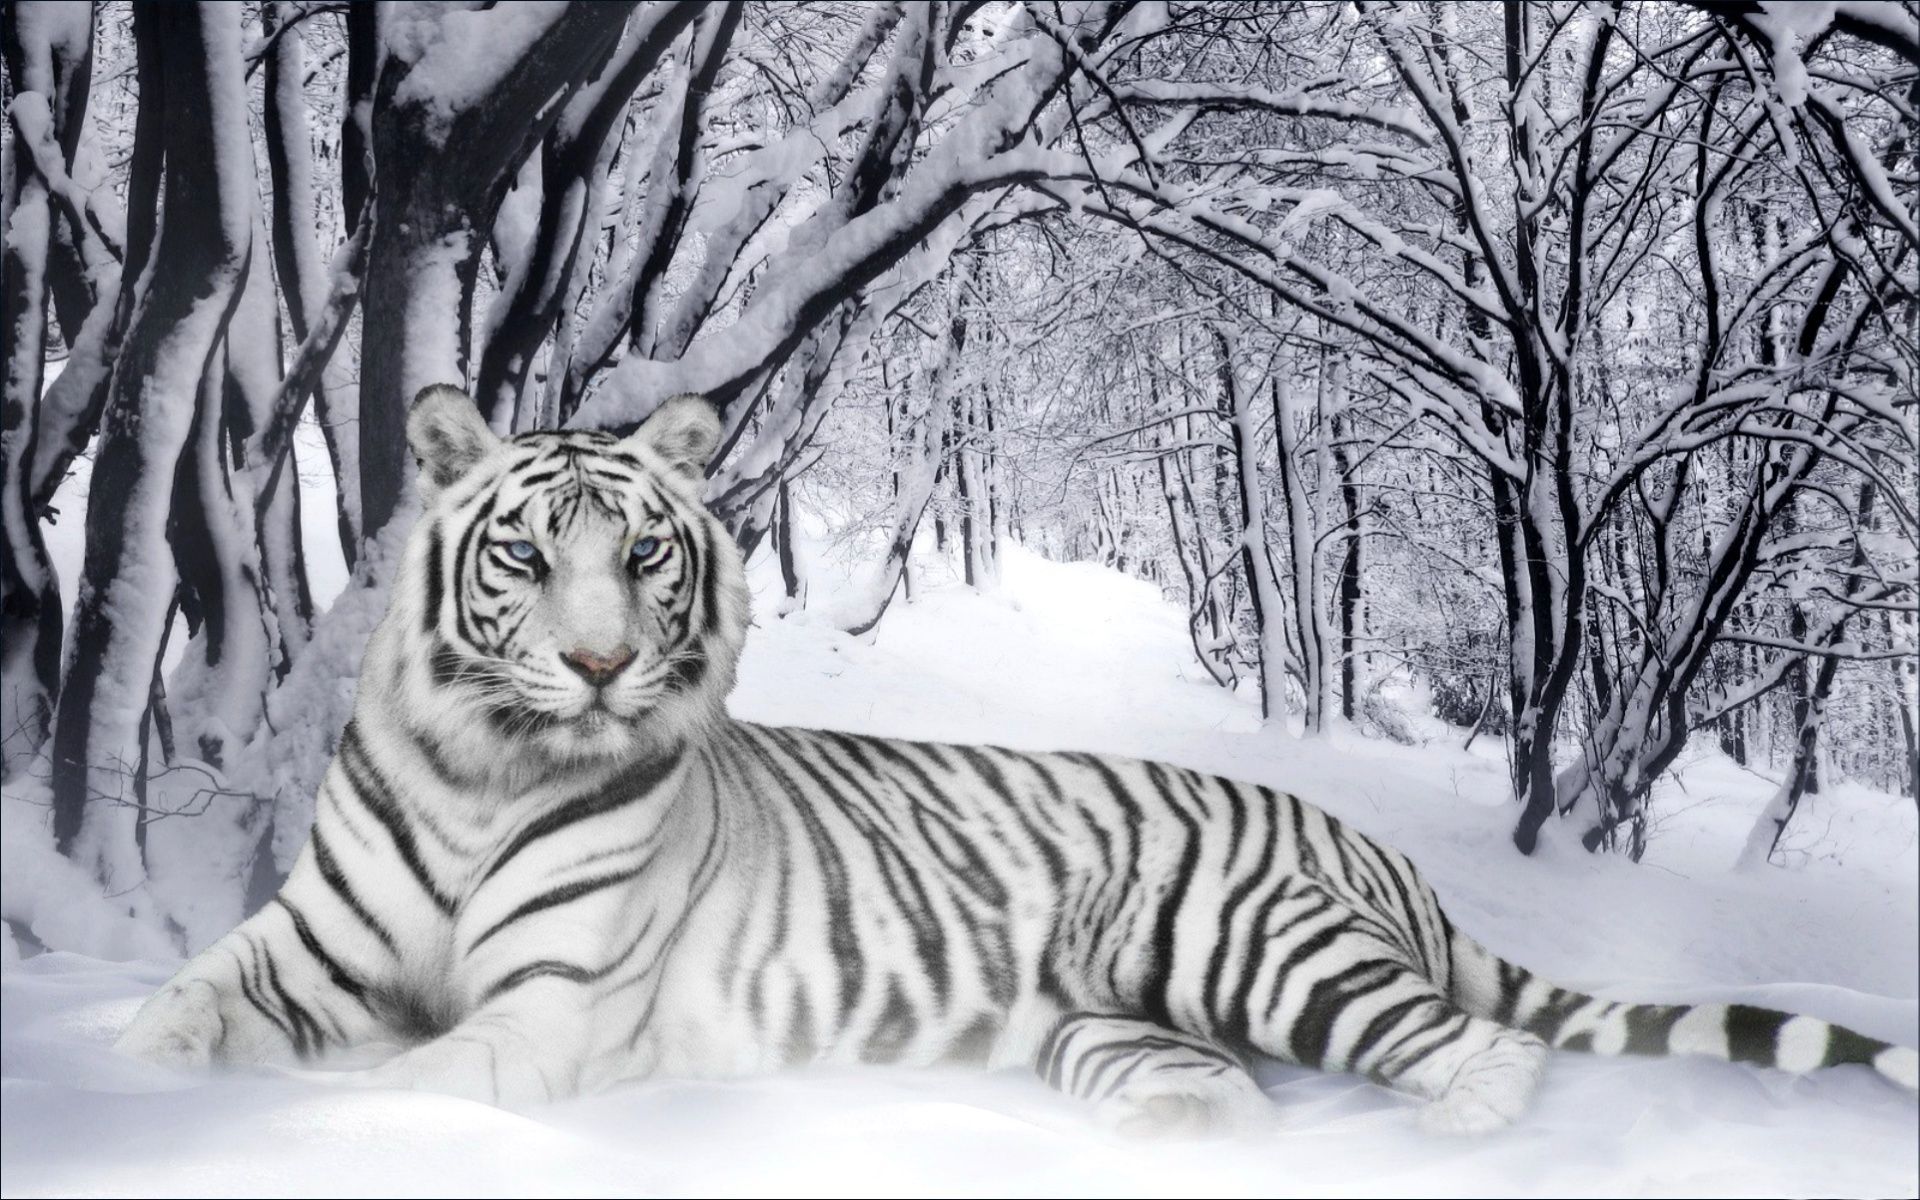 White Tiger in the Winter Wallpaper Wide Photos - Ehiyo.com